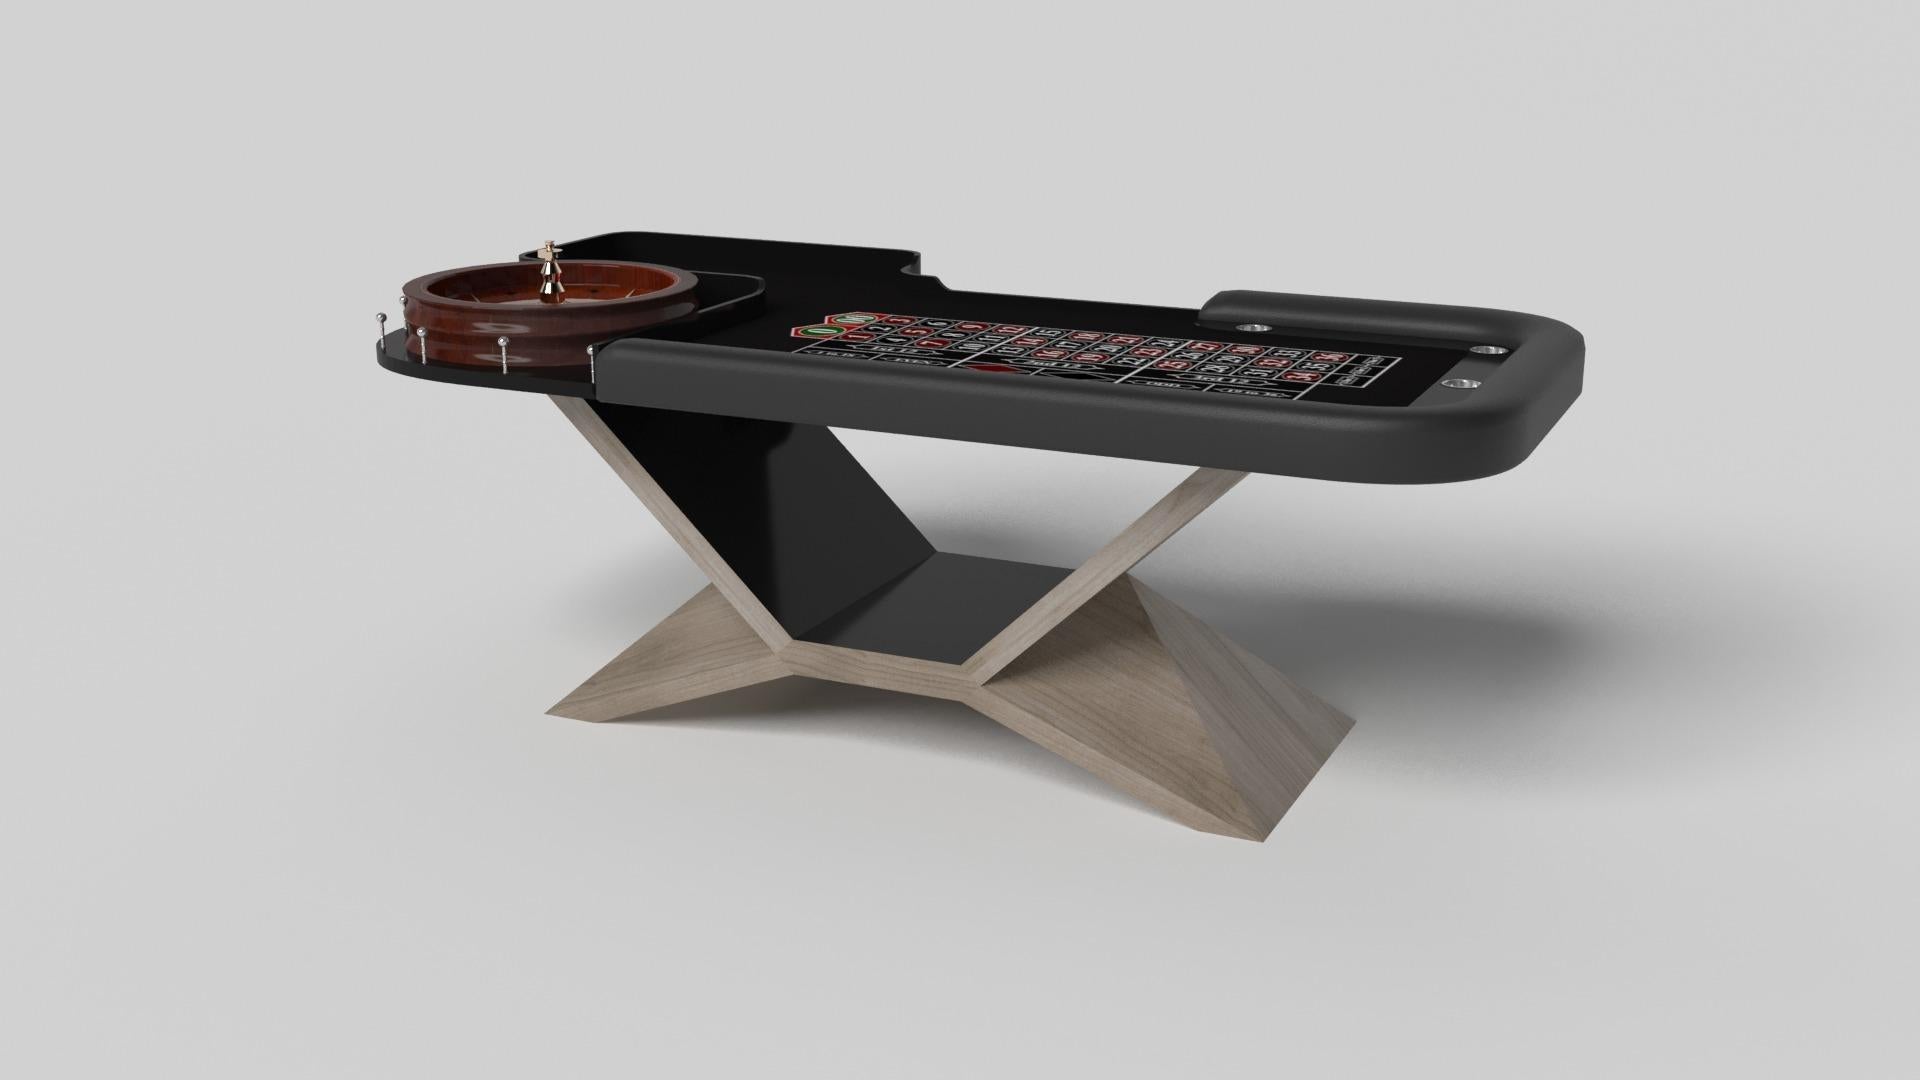 In chrome metal, the Kors roulette table is a superior example of contrasting geometric forms. This table features an angular base that highlights the beauty of negative space from the front view. From the side view, it offers a completely different